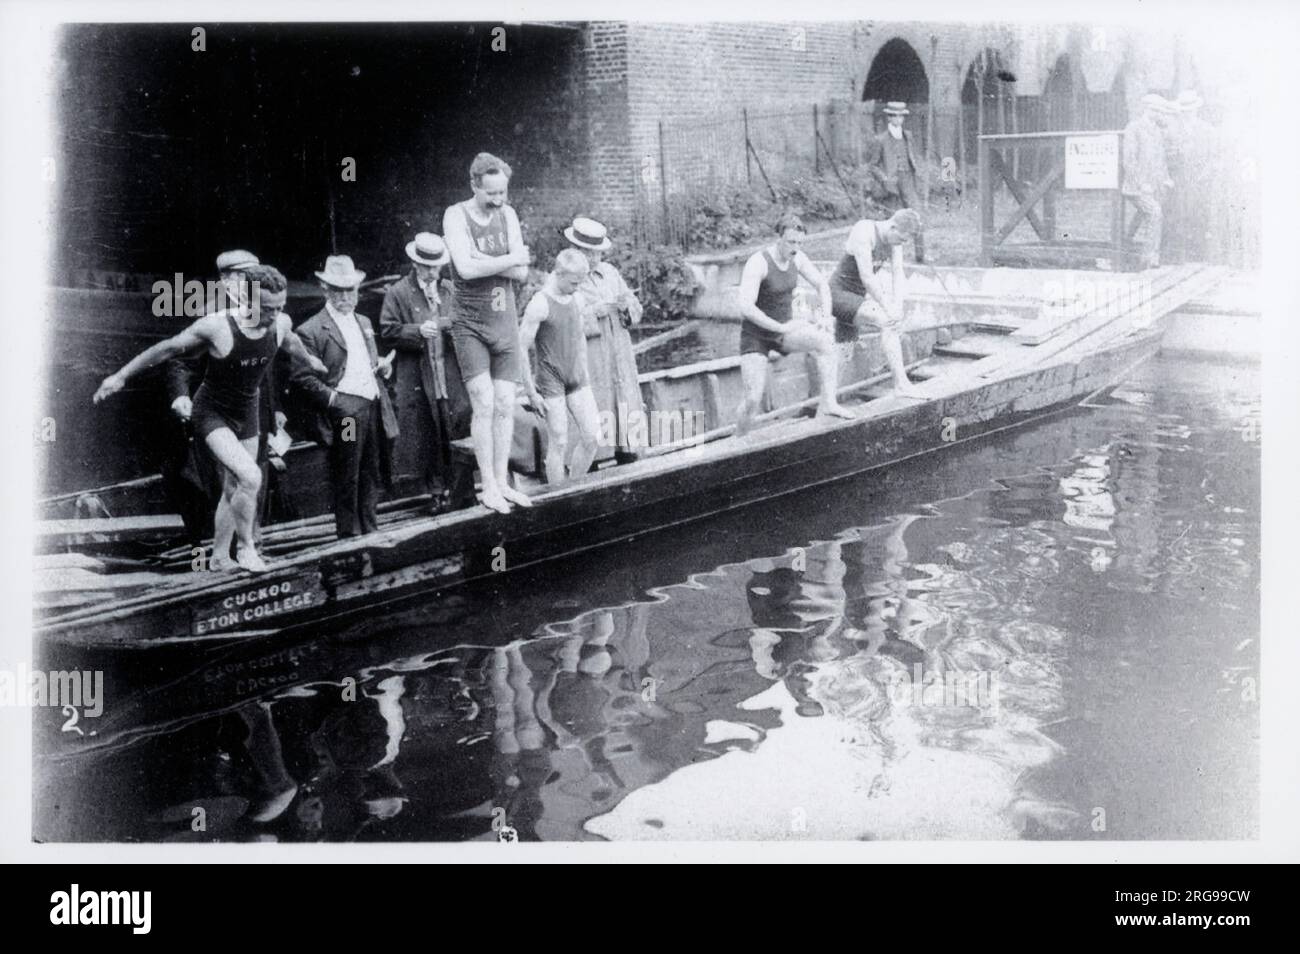 Members of the W. S. C. (Windsor Swimming Club) who have borrowed the Eton College Punt 'Cuckoo' to use as the starting line for a race on the River Thames. The course ran from the Great Western Railway (GWR) Bridge to the WSC Swimming Baths (a distance of about 400 yards). Stock Photo